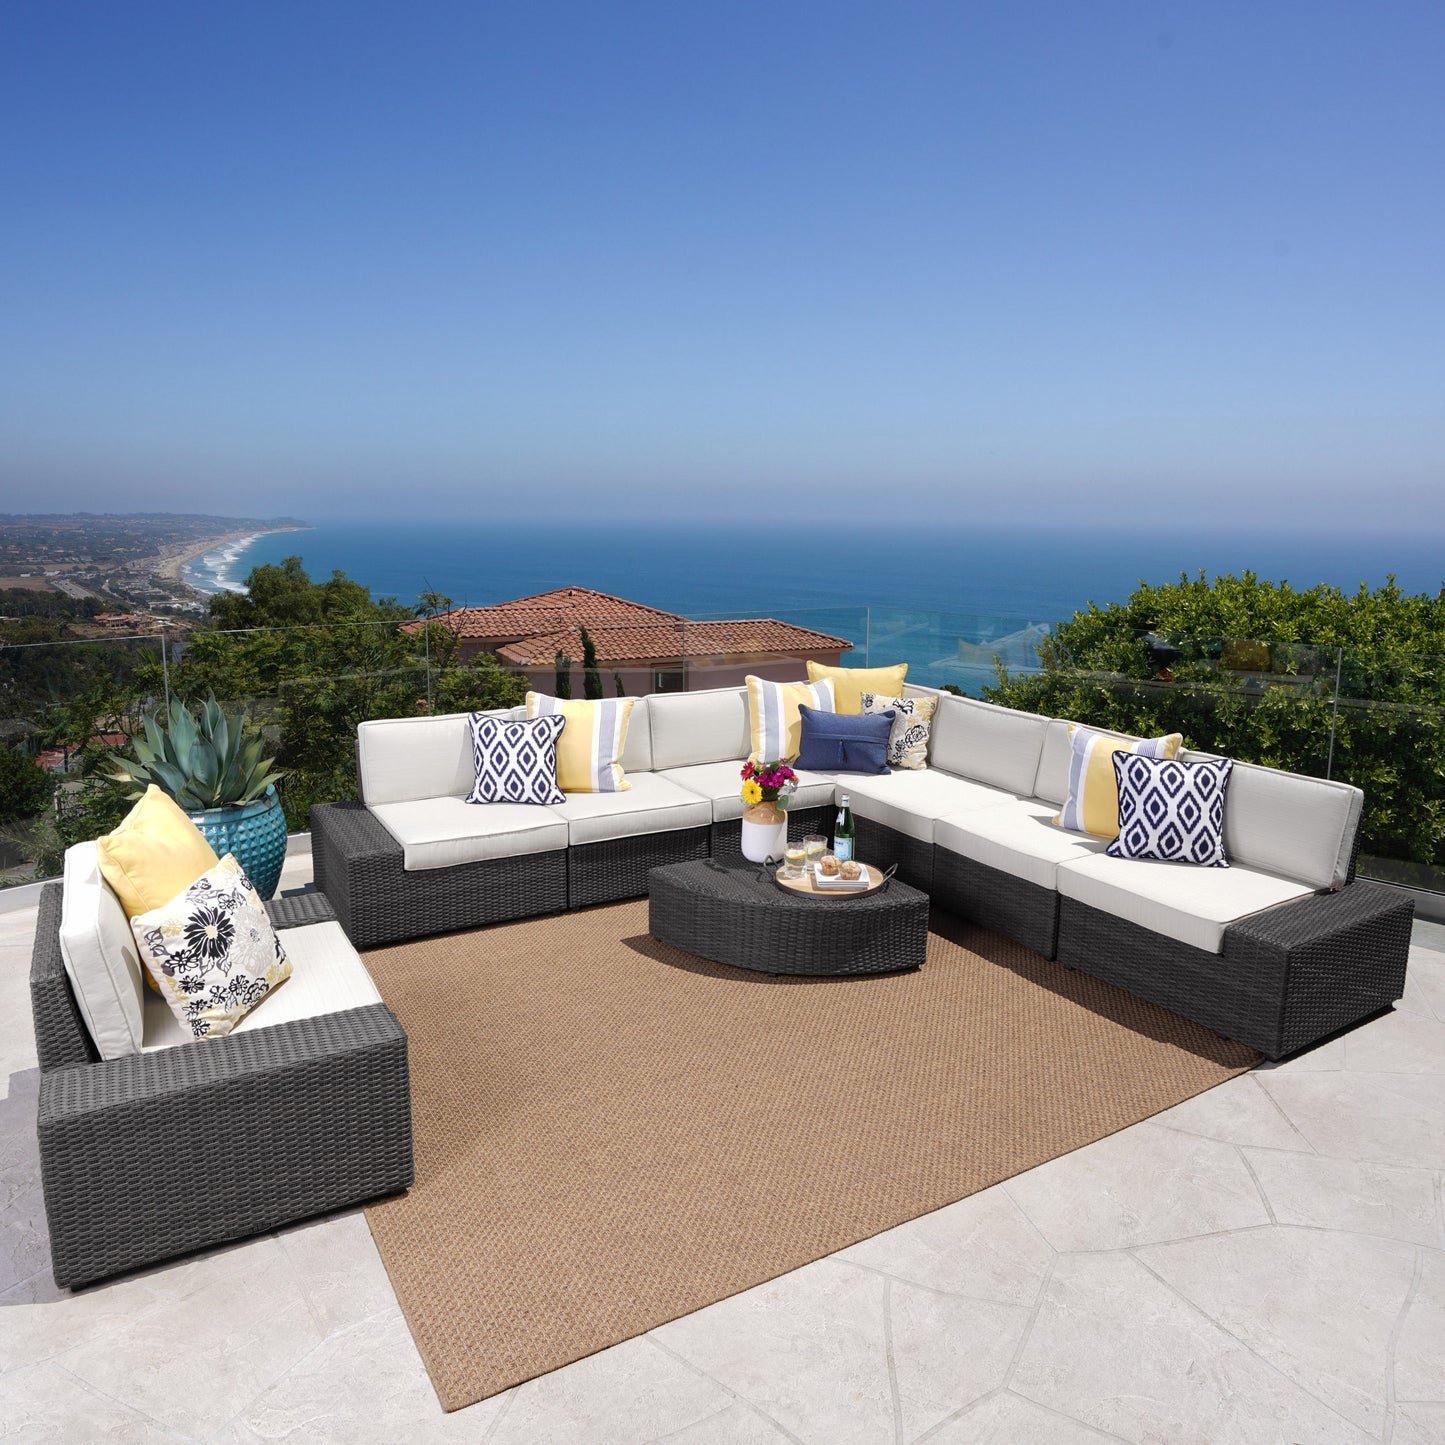 Reddington Outdoor 9 Piece Wicker Sectional with Beige Water Resistant Cushions